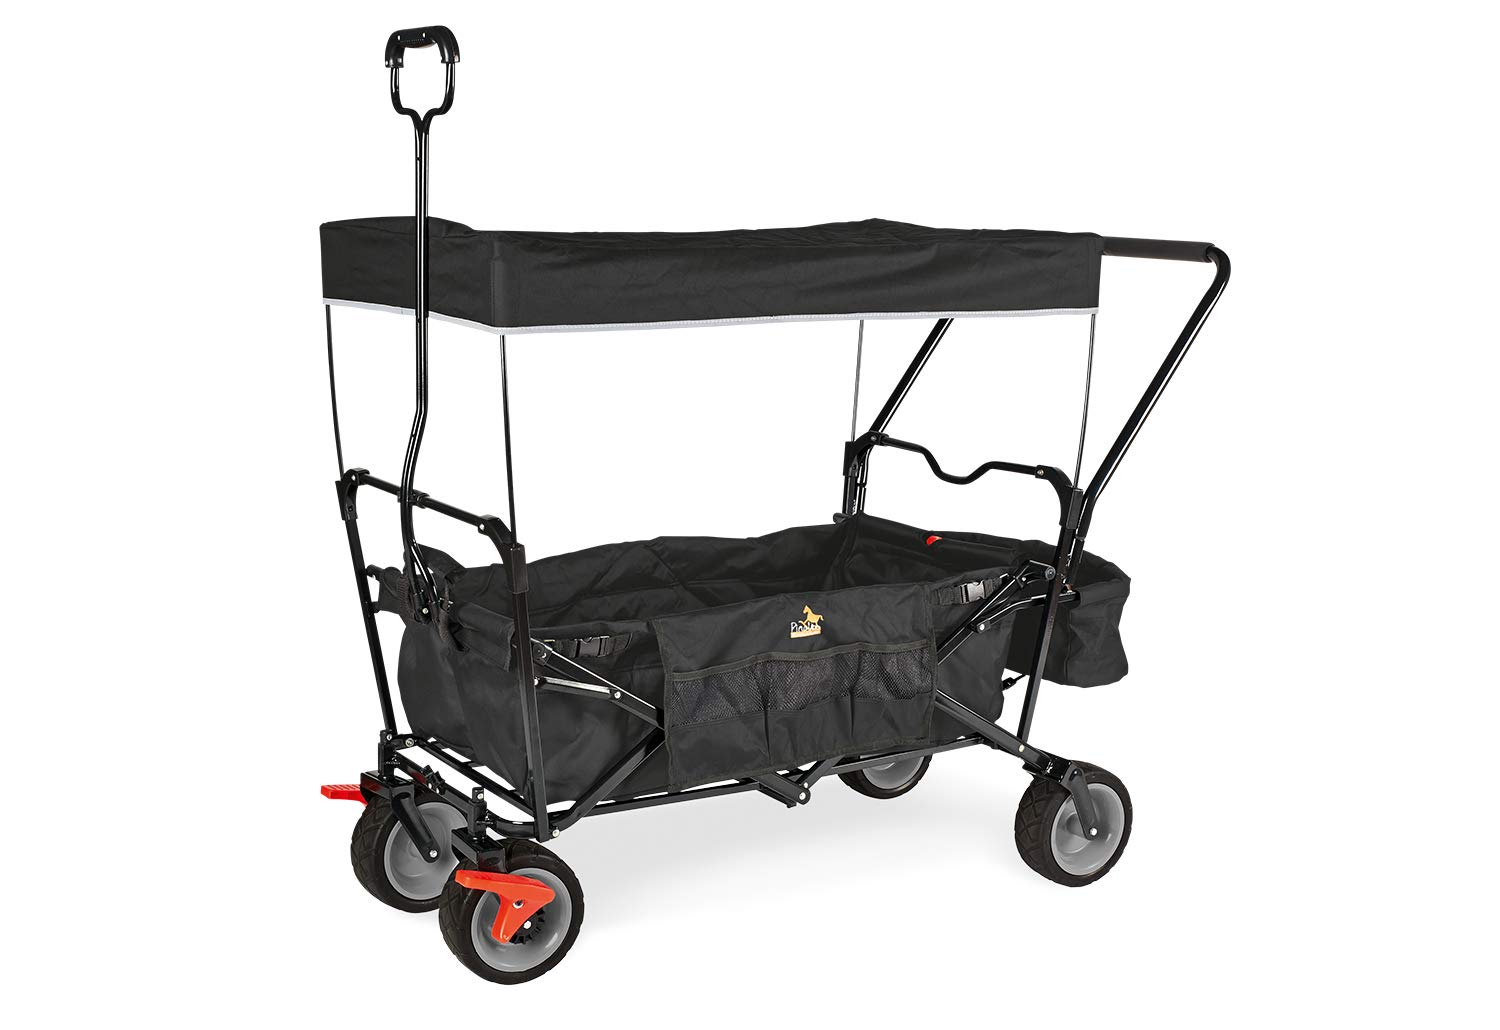 Pinolino Paxi Dlx Comfort Folding Handcart With Brake Incl. Sun Canopy And 